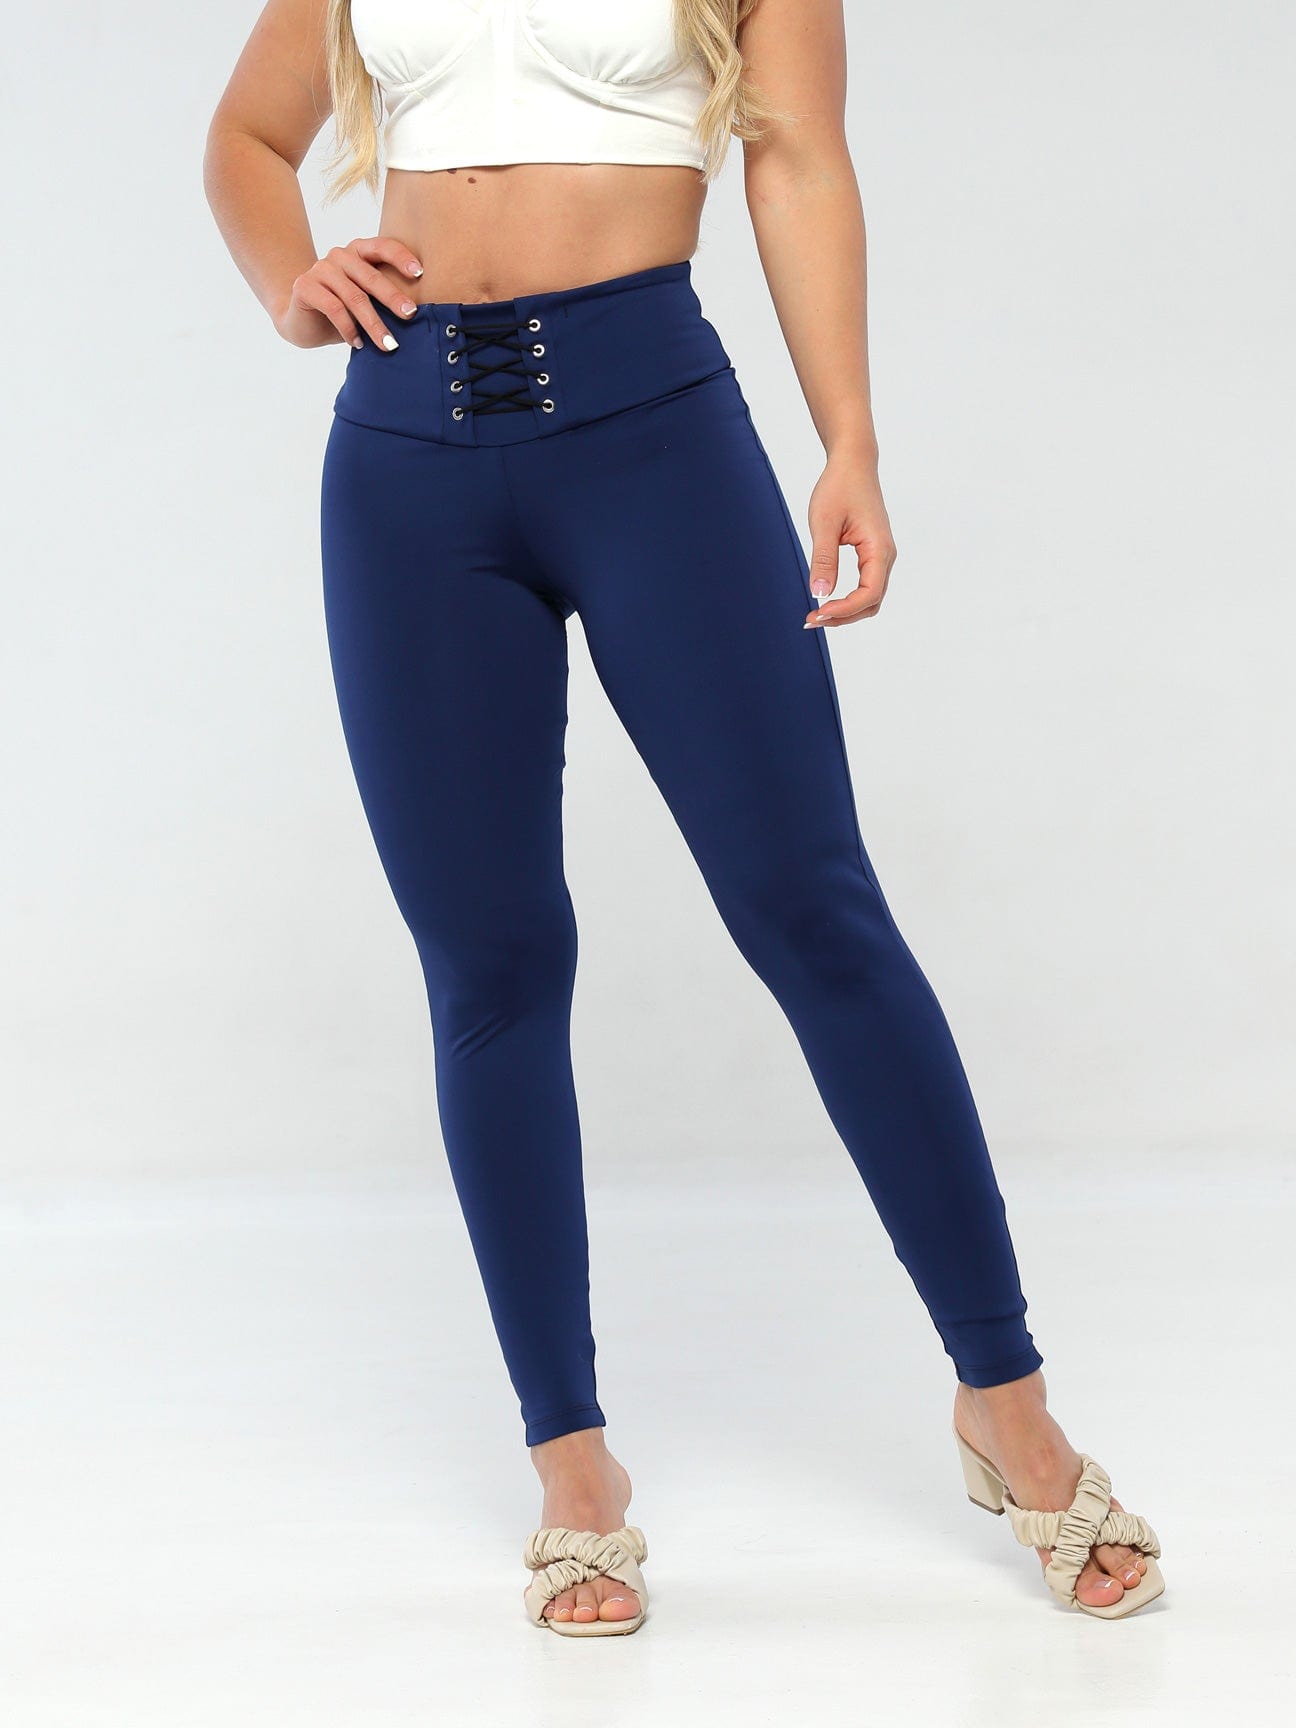 Four Button High Waisted Jeggings